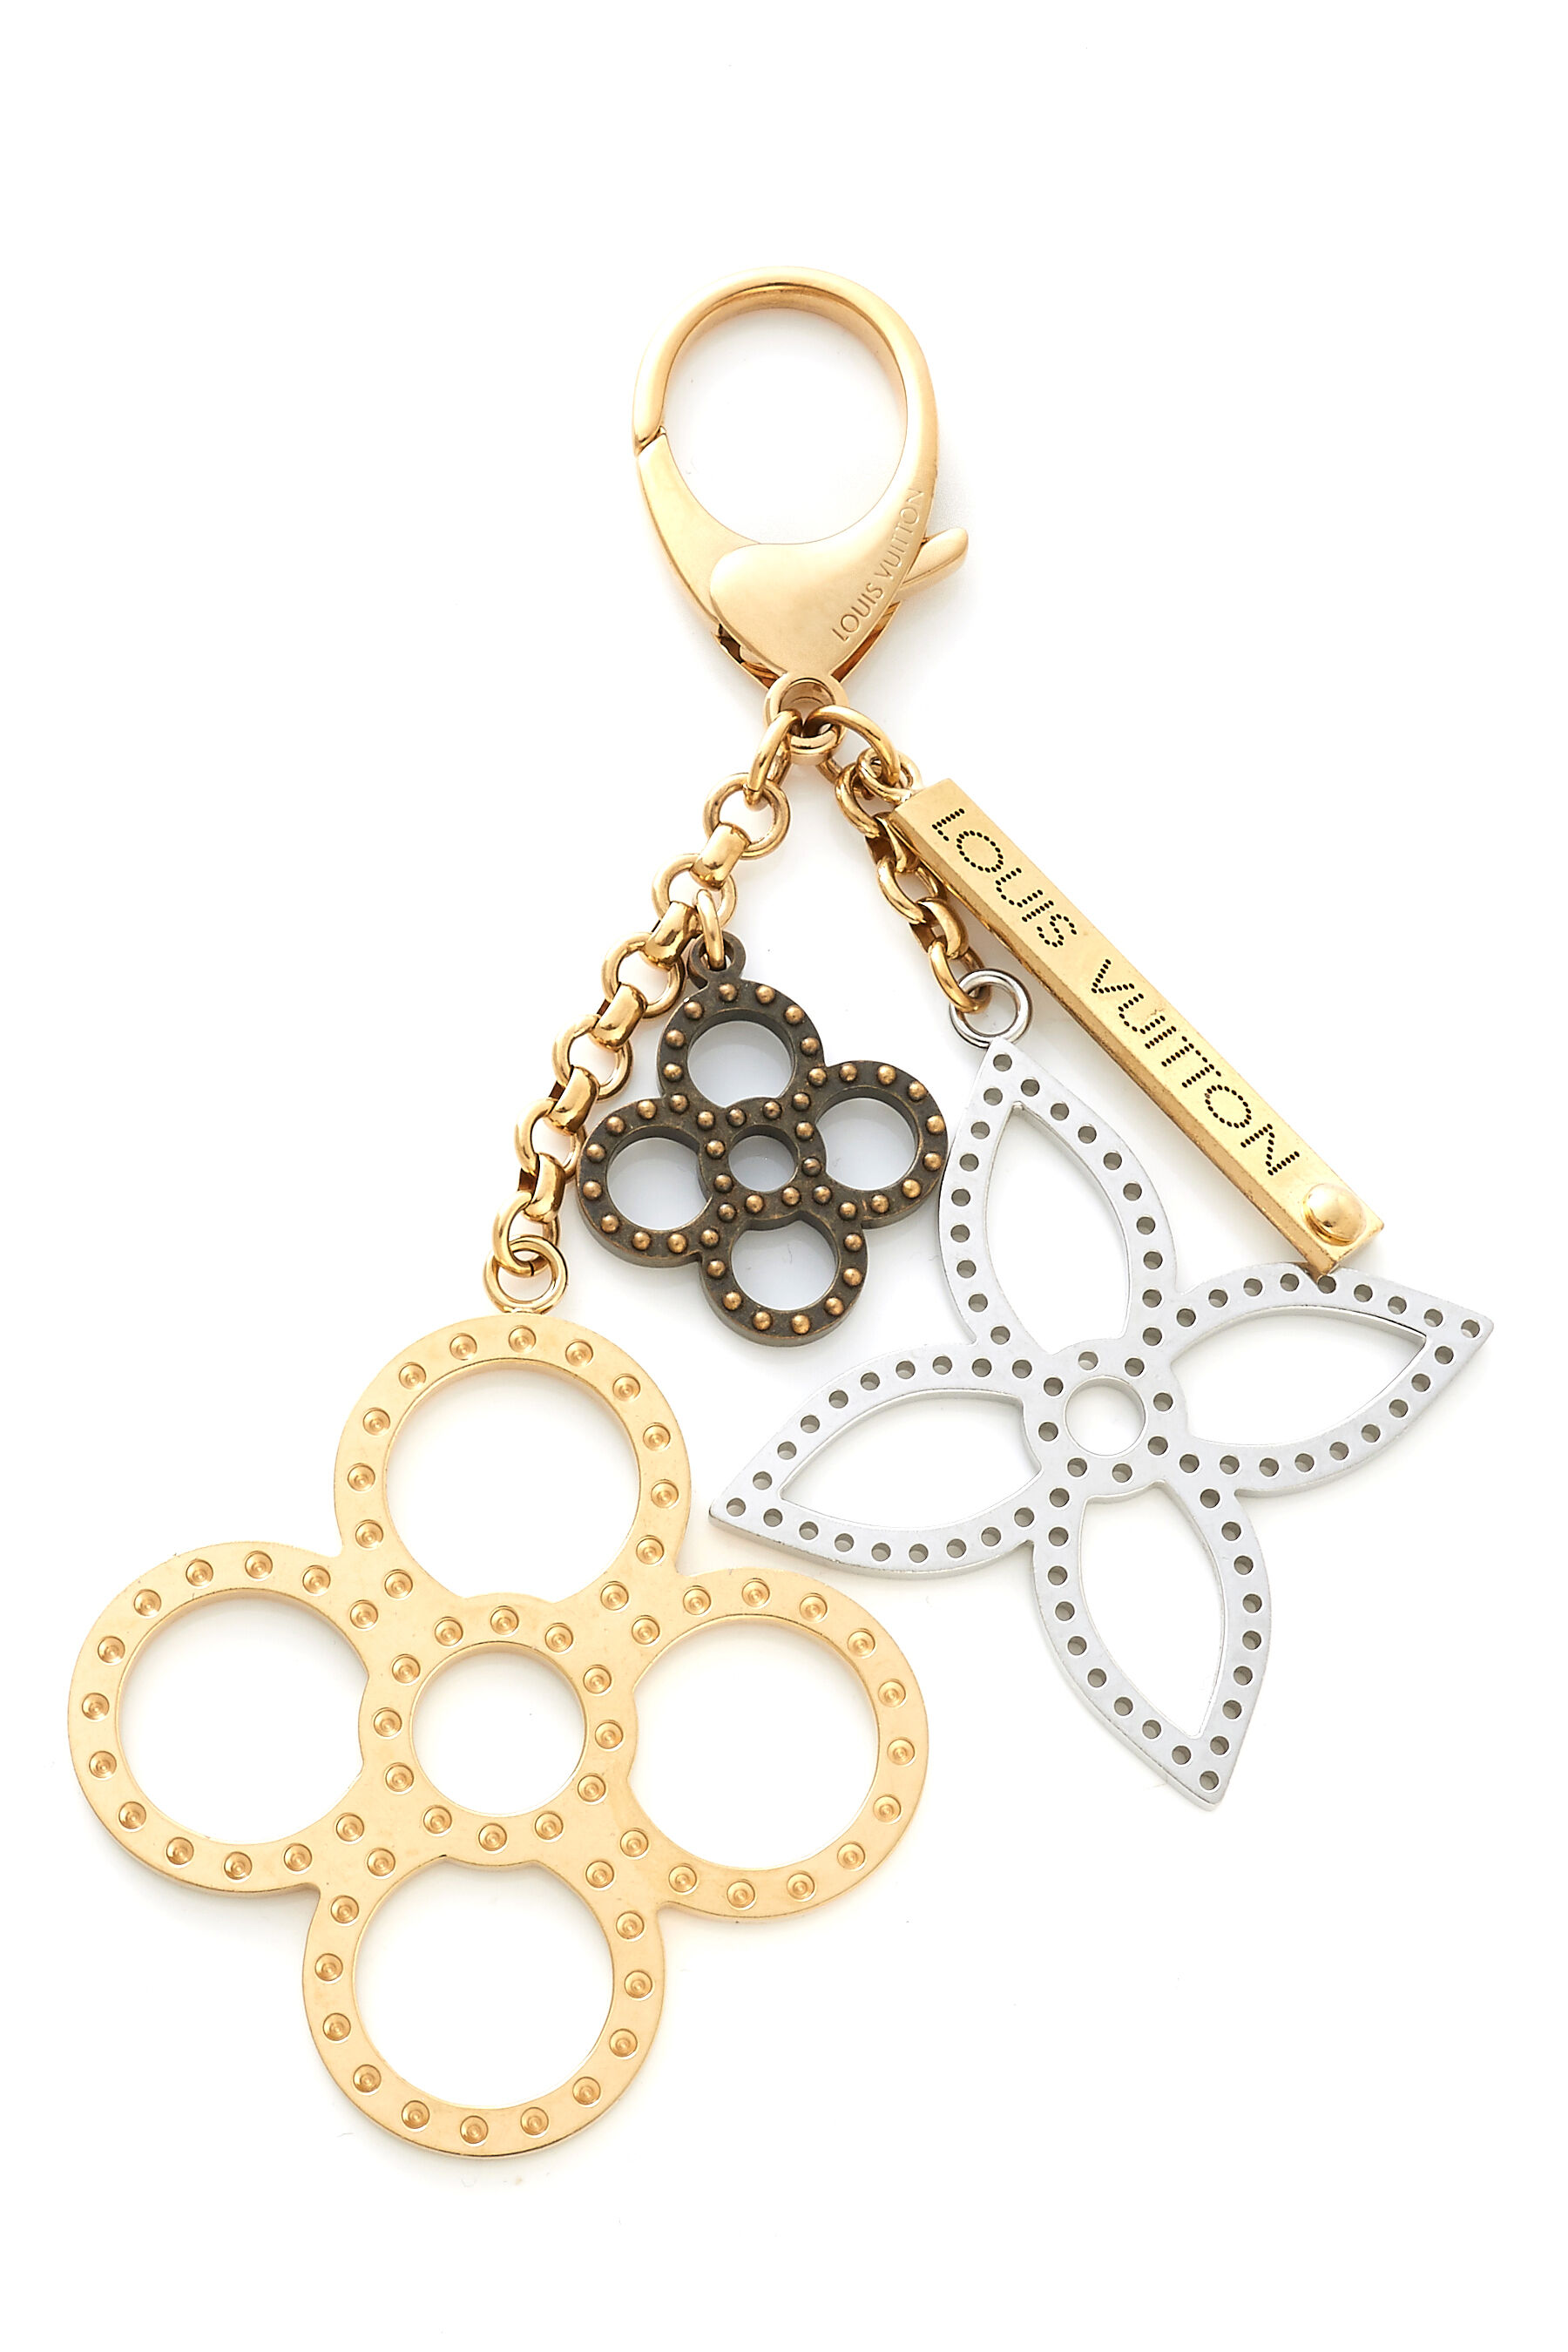 Shop Louis Vuitton Keychains & Bag Charms (M01350) by aya-guilera